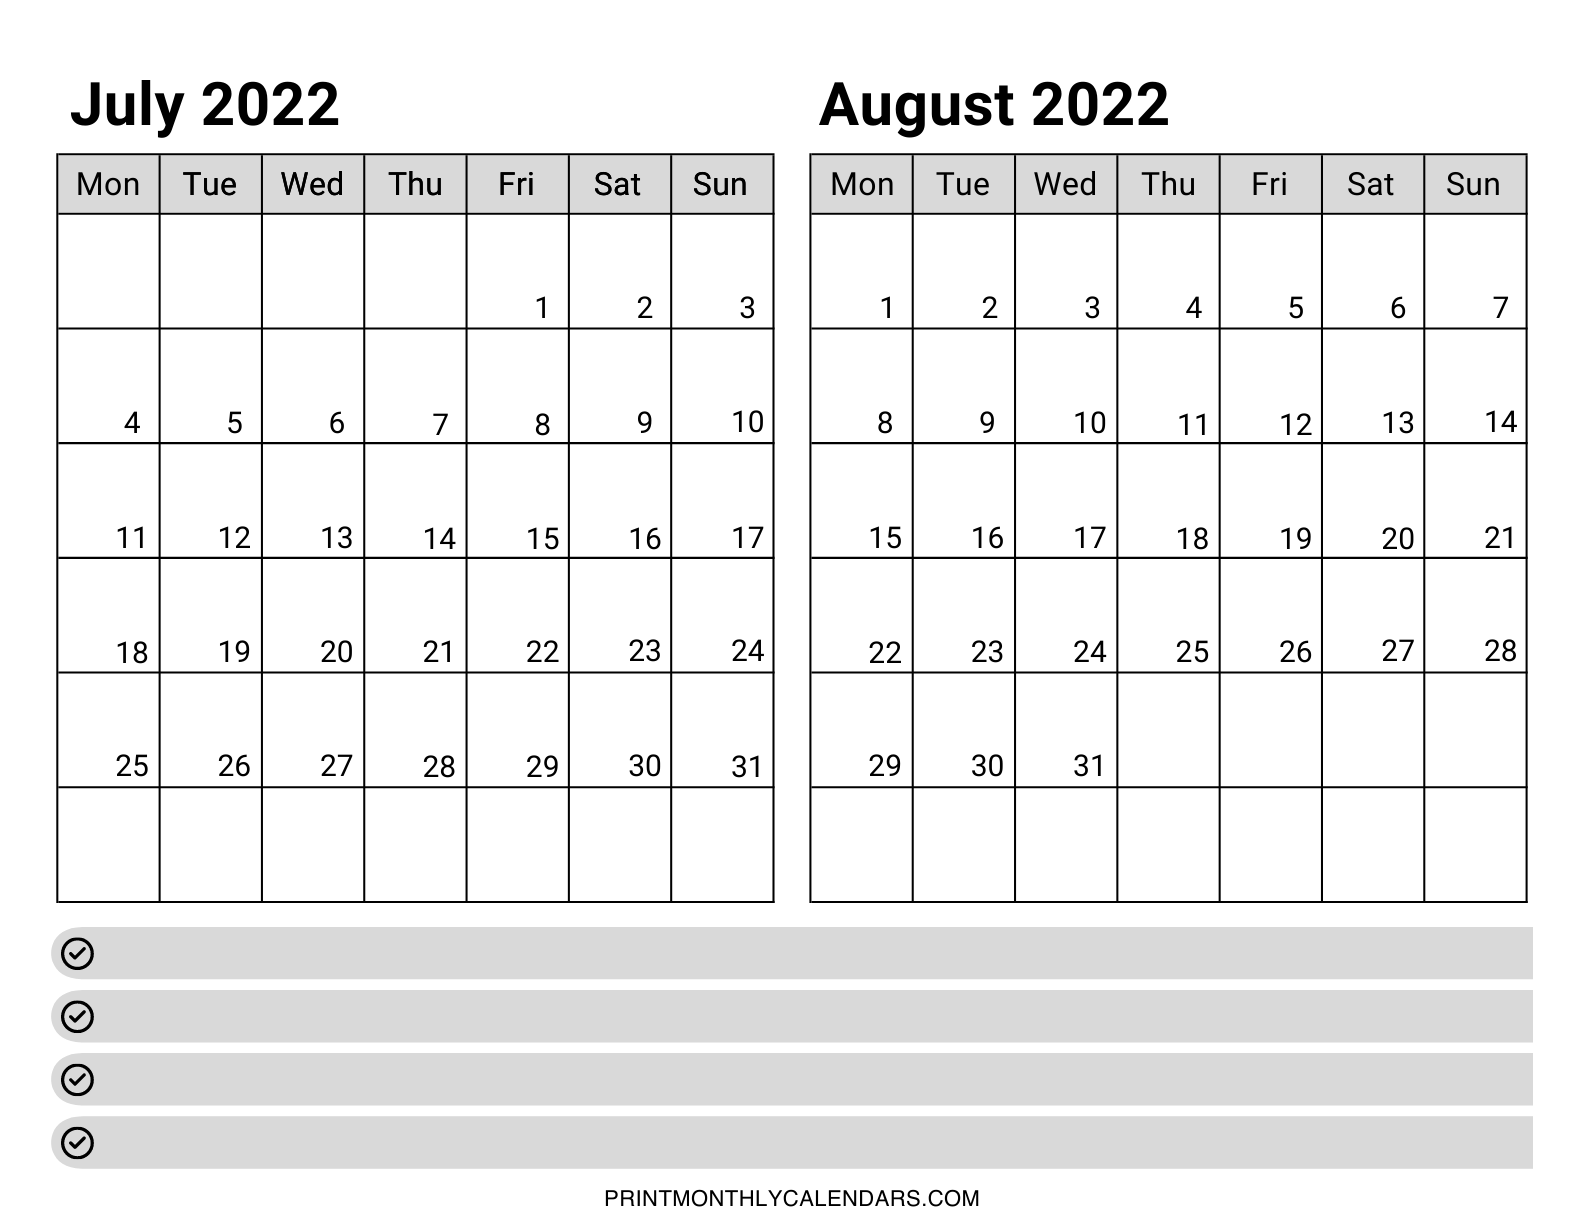 Two-month calendar for July and August with blank notes section. The calendar is designed in a landscape format, with a notes section at the bottom in the shape of rows.